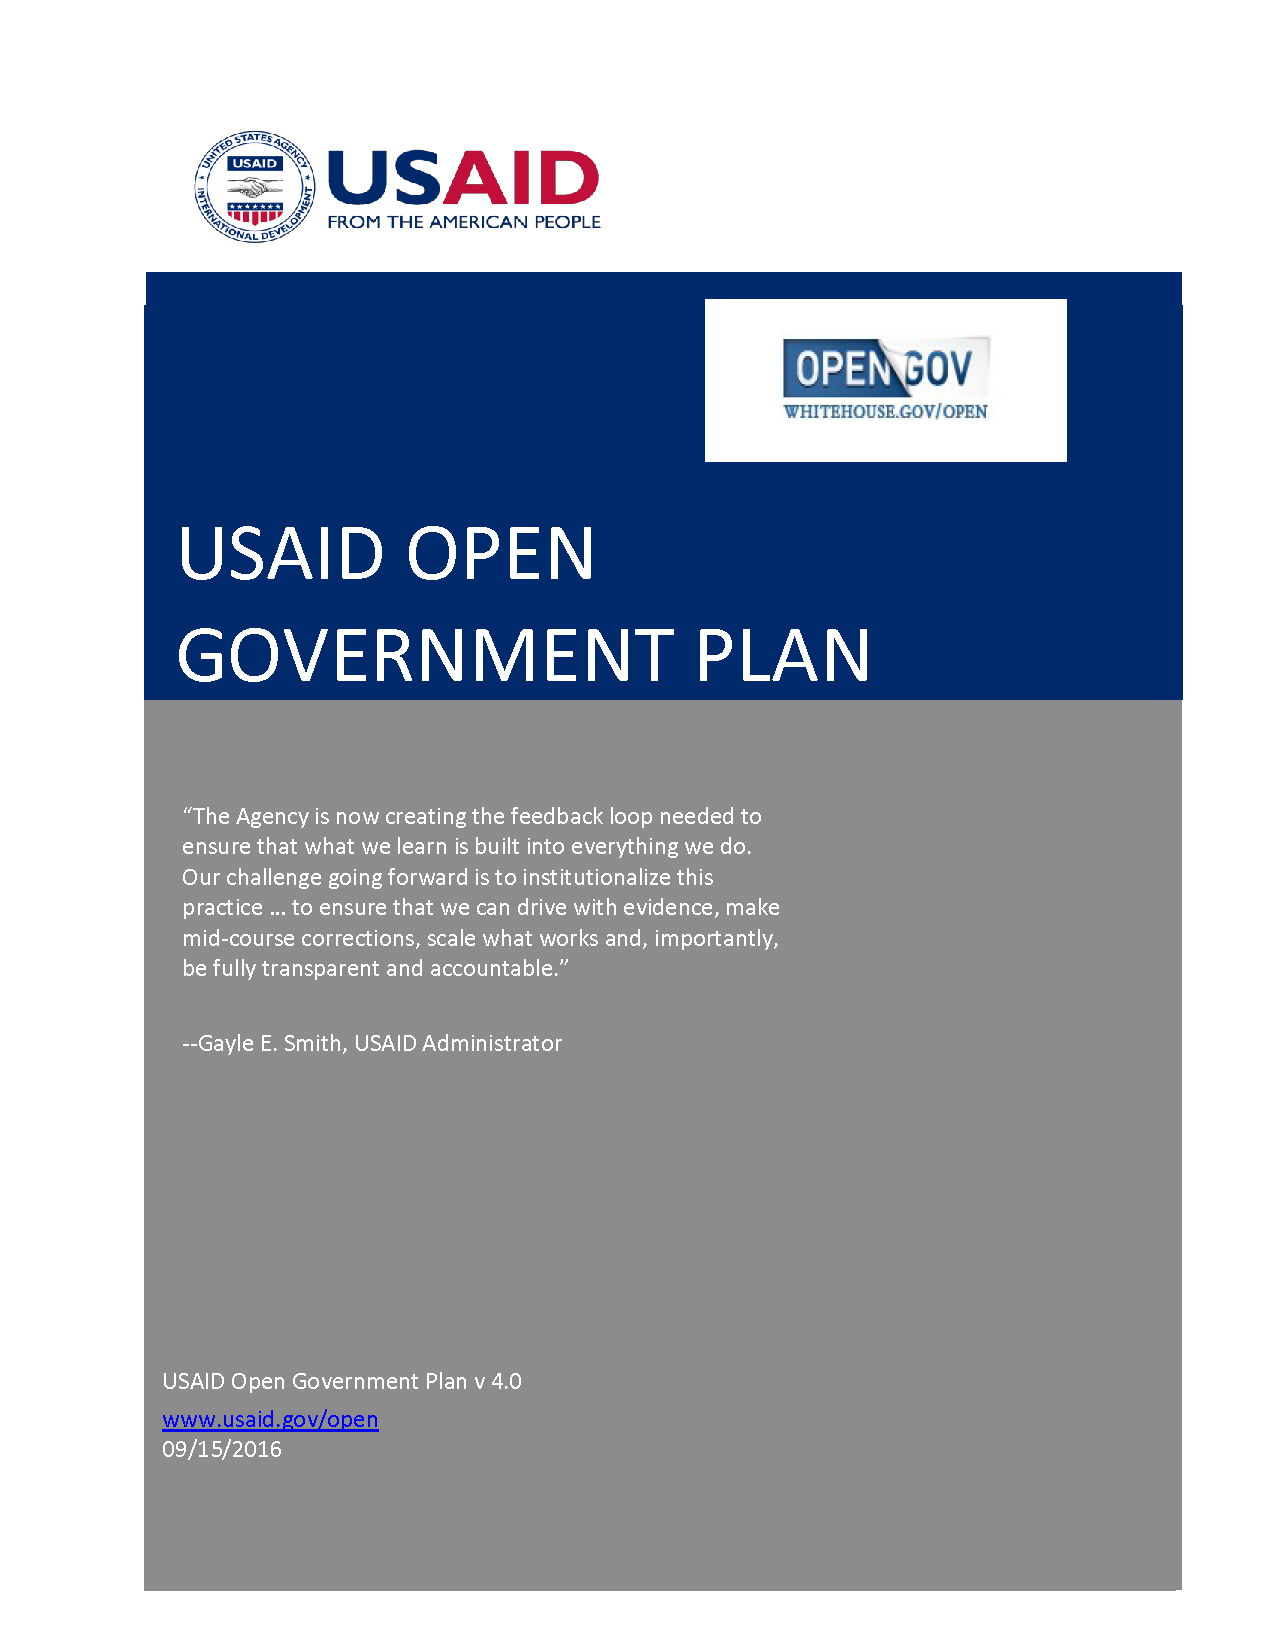 USAID Open Government Plan v4.0